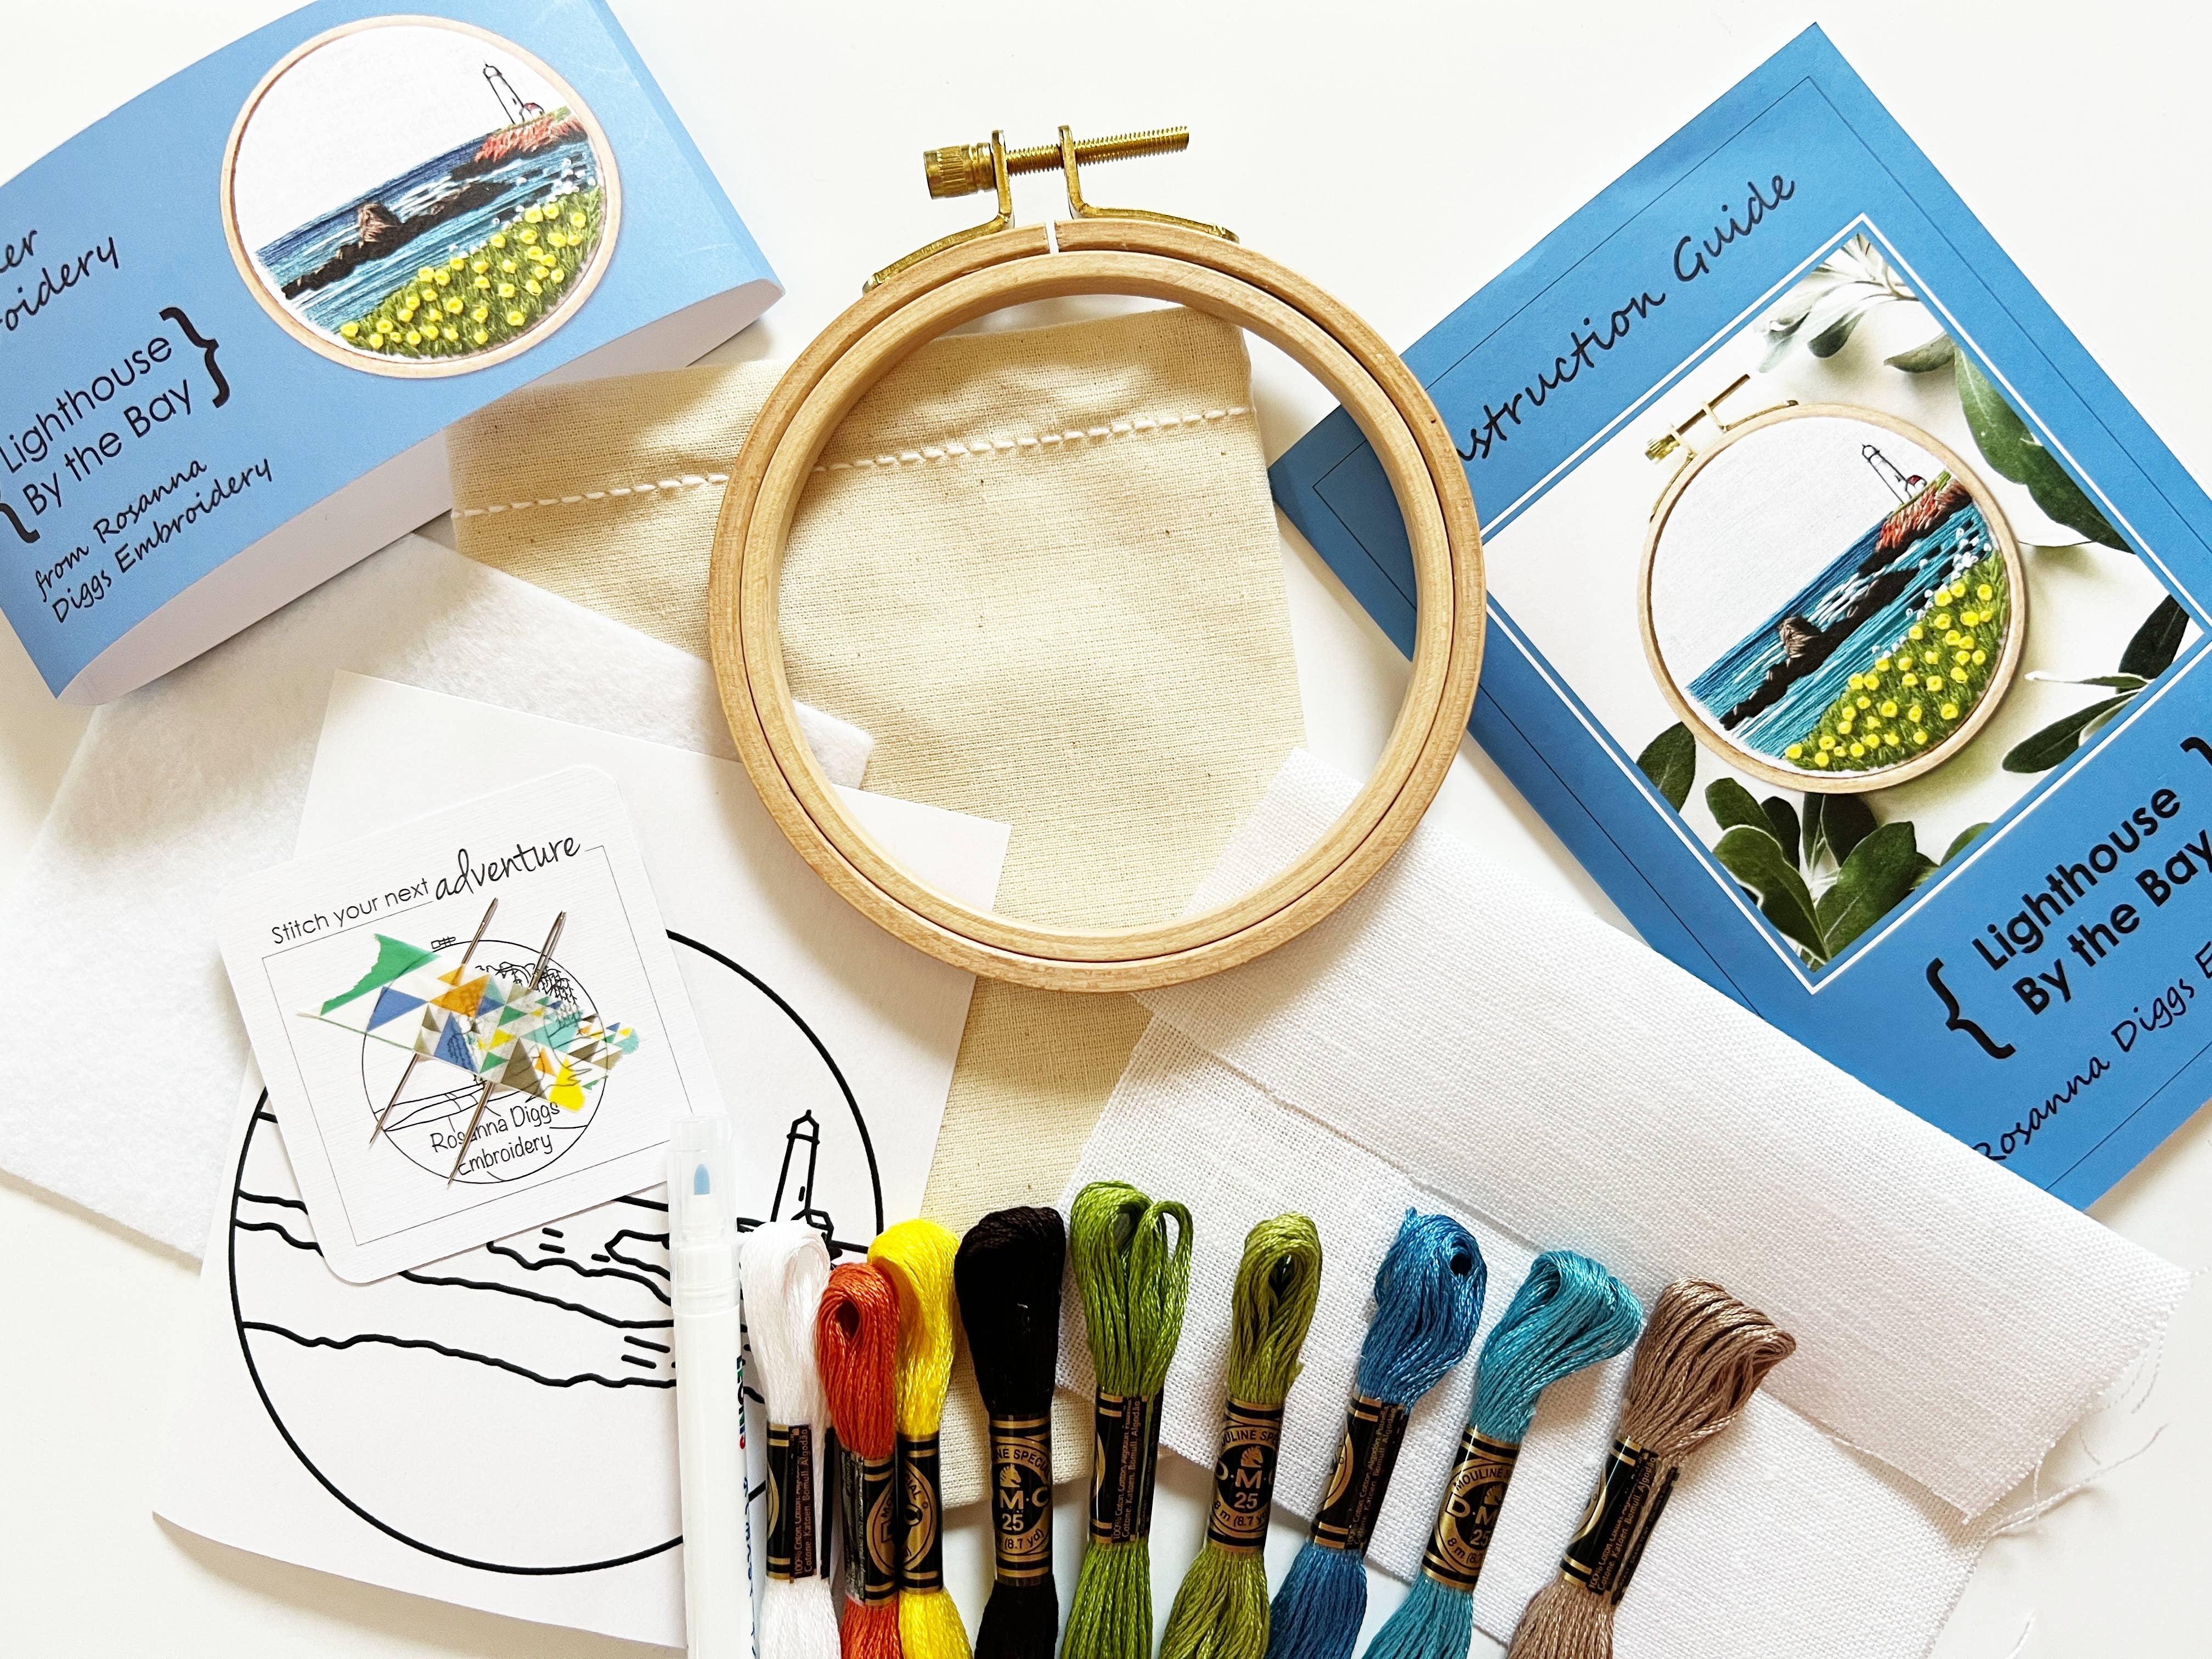 Lighthouse embroidery kit contents